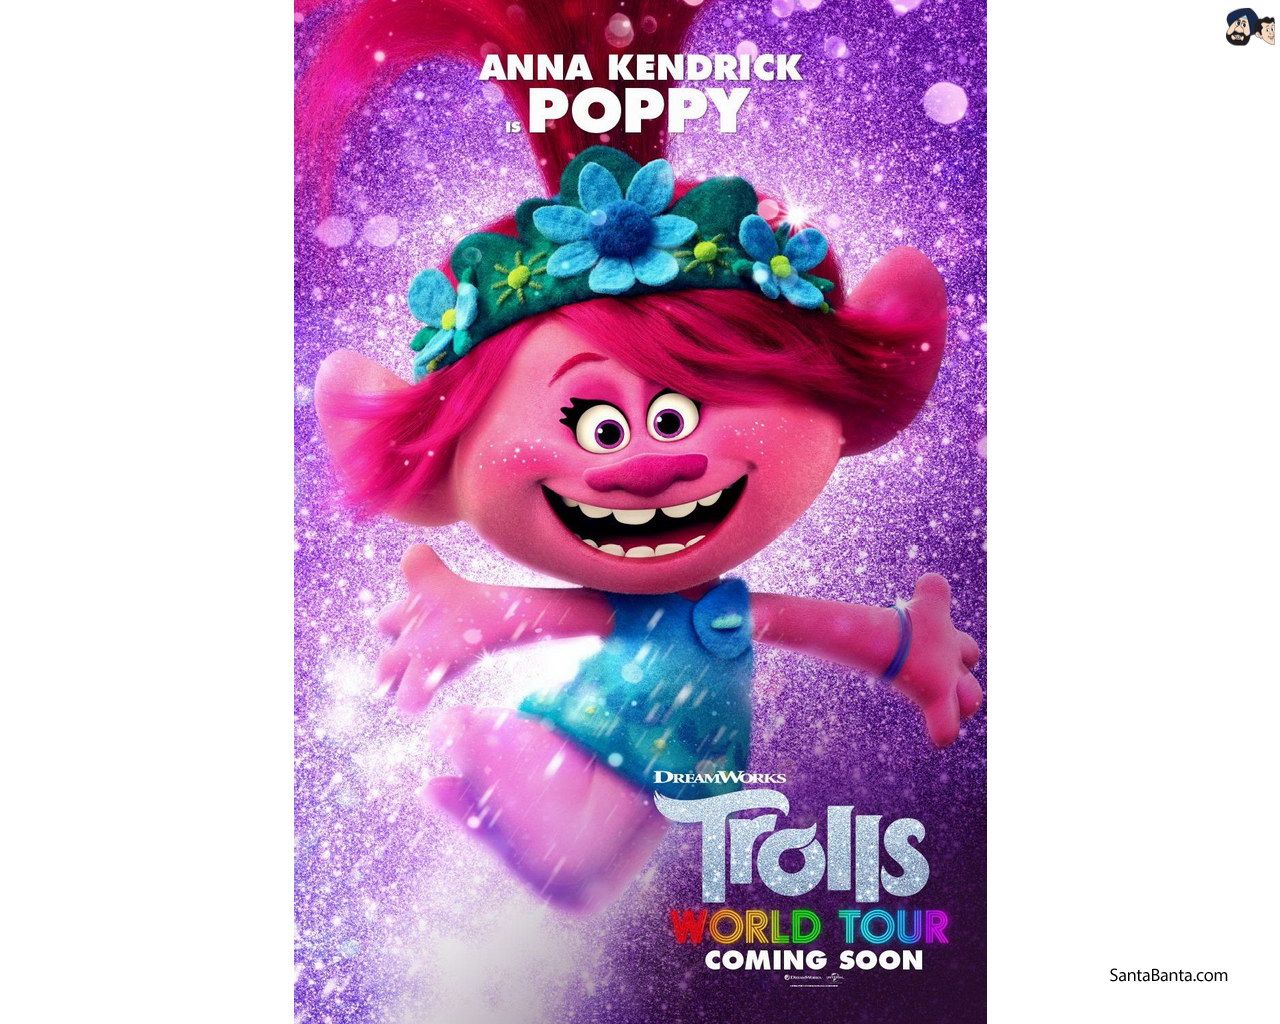 Anna Kendrick as `Poppy` in Hollywood animated film